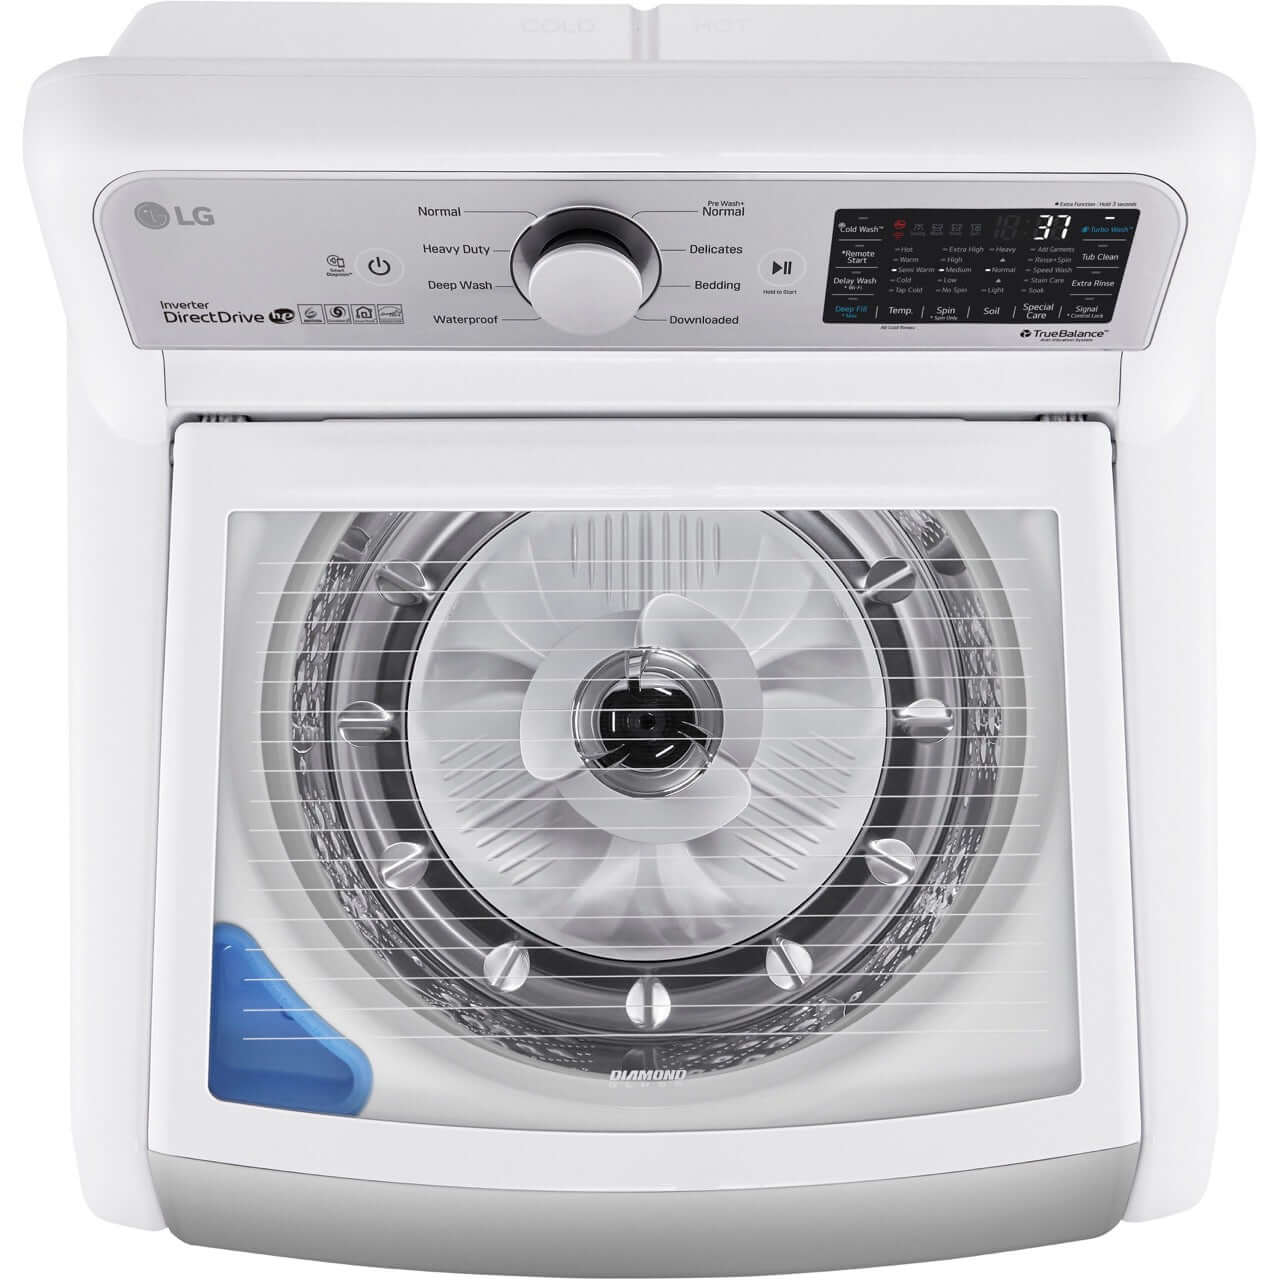 LG 27 In. 4.8-Cu. Ft. Top Load Washer with Agitator and TurboWash3D Technology in White (WT7305CW)